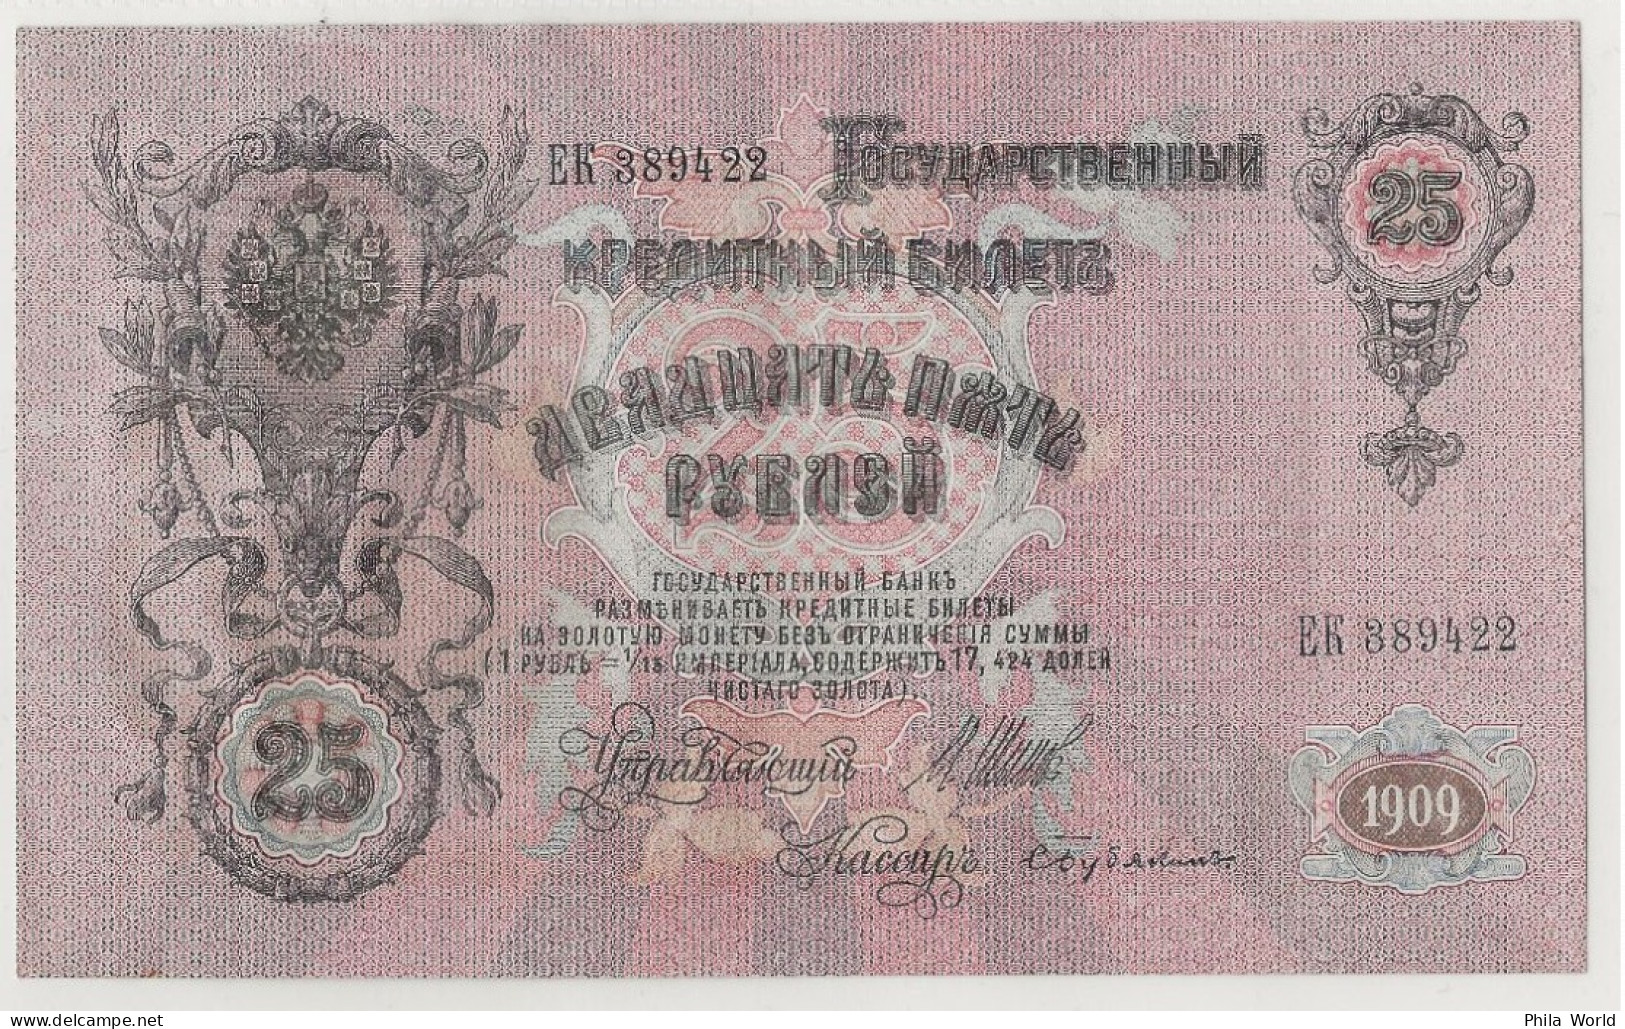 RUSSIE RUSSIA 25 ROUBLES Rubles Russian 1909 Billet Banque Bank Note Banknote Alexandre Alexander III Shipov Gusev - Russie